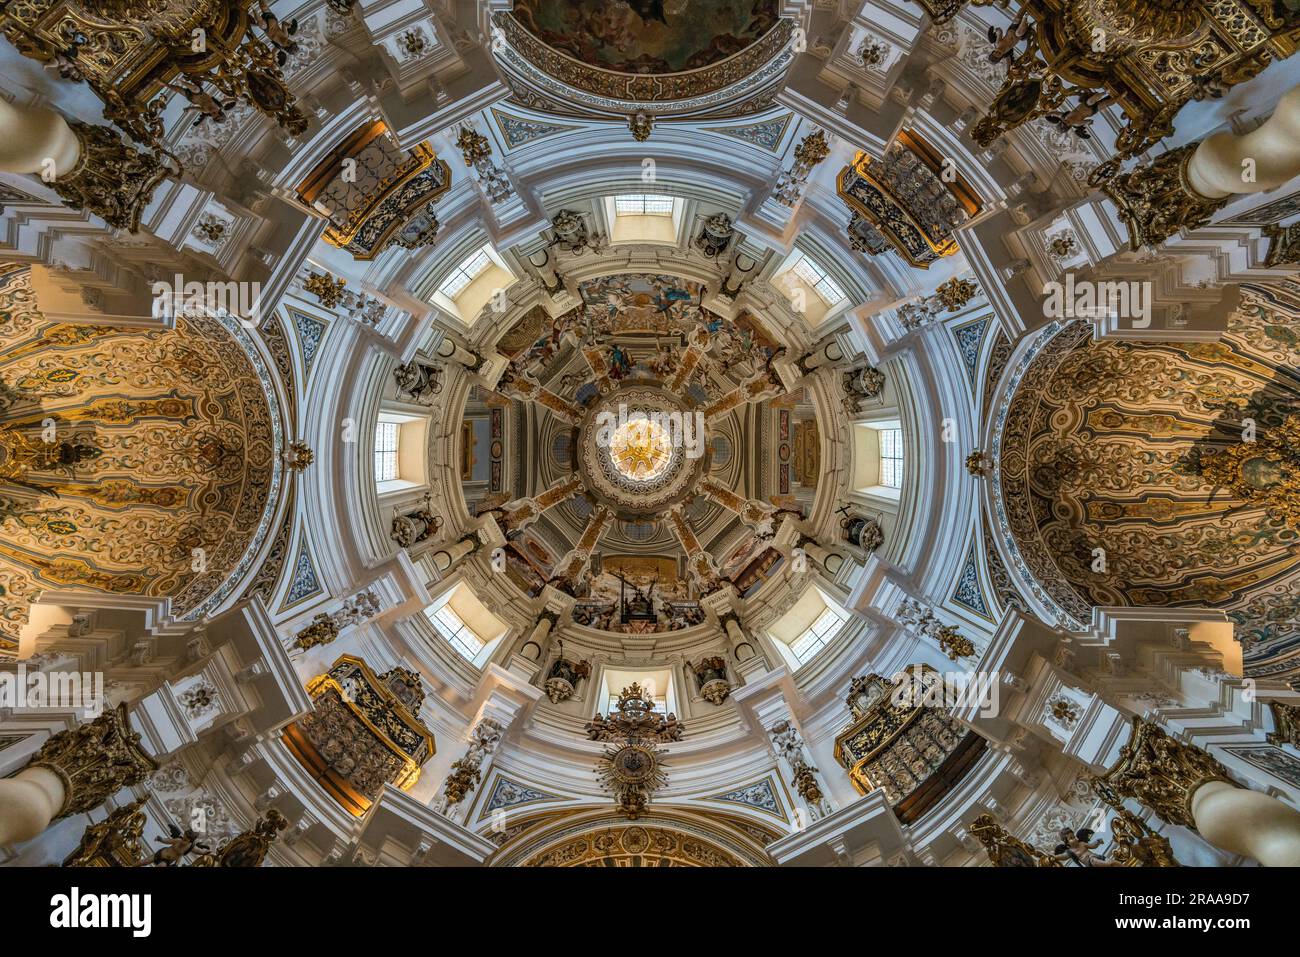 Seville, Spain - June 16, 2023 : Interior wide angle view of Dome and ceilling of baroque style Church of San Luis de los Franceses. Stock Photo